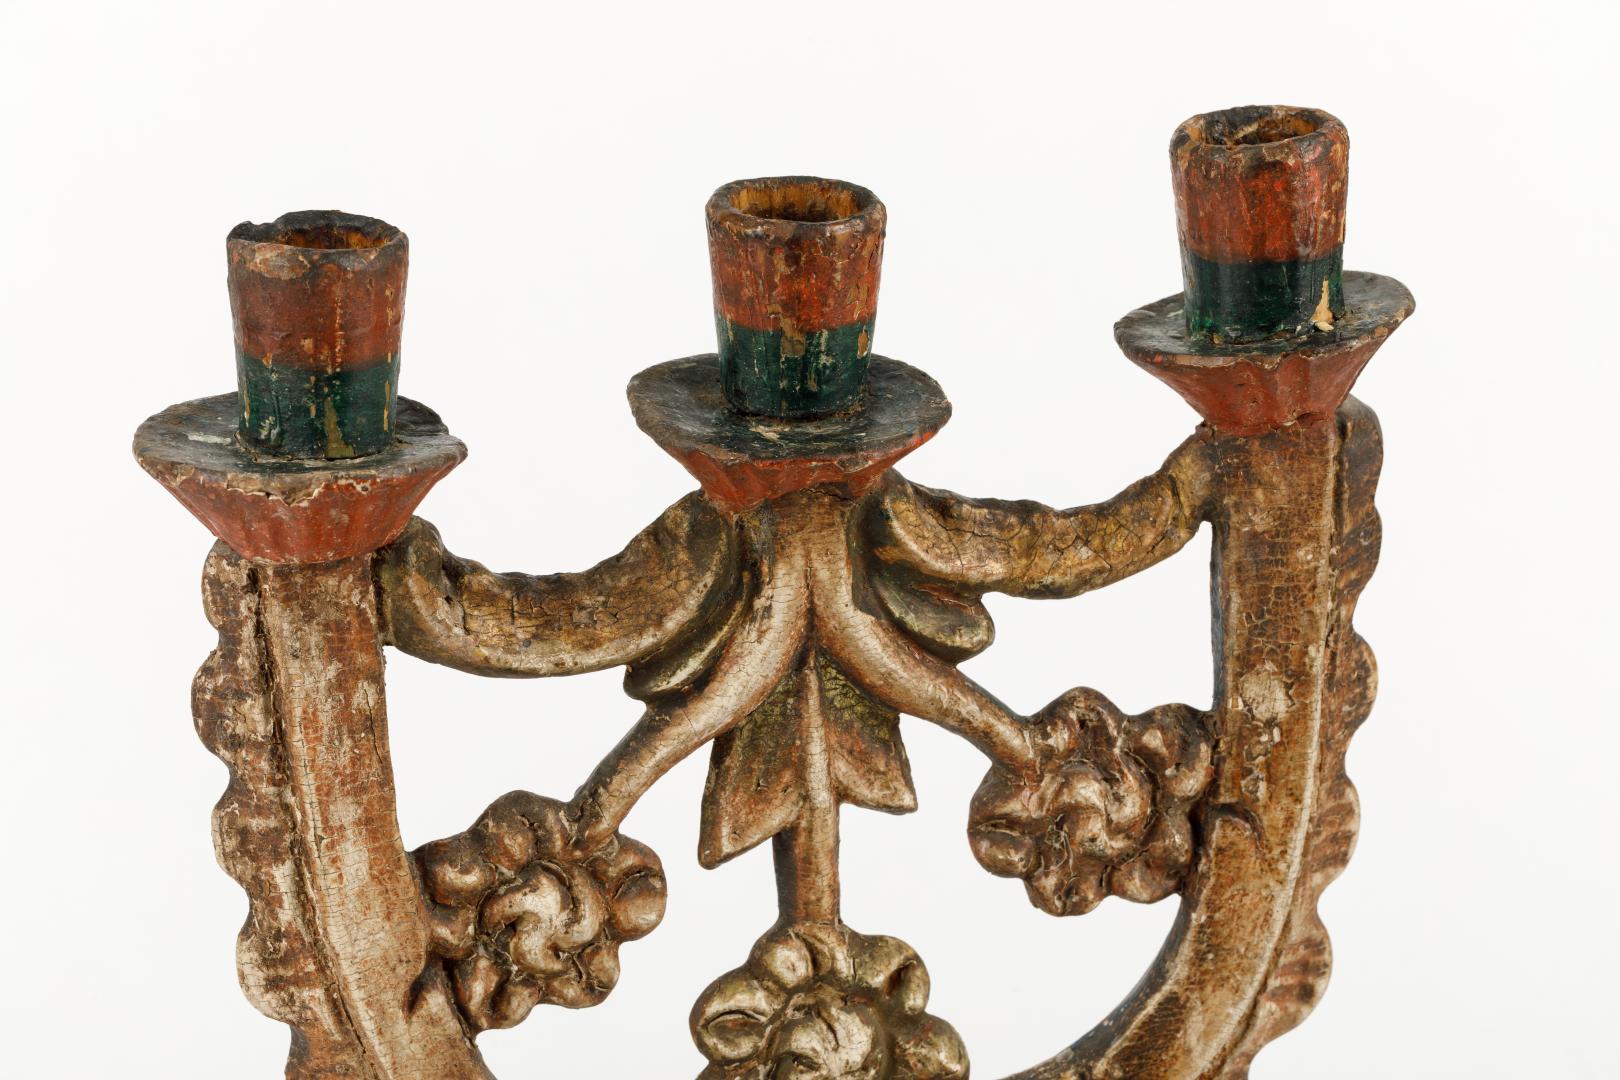 Candelabra with three arms